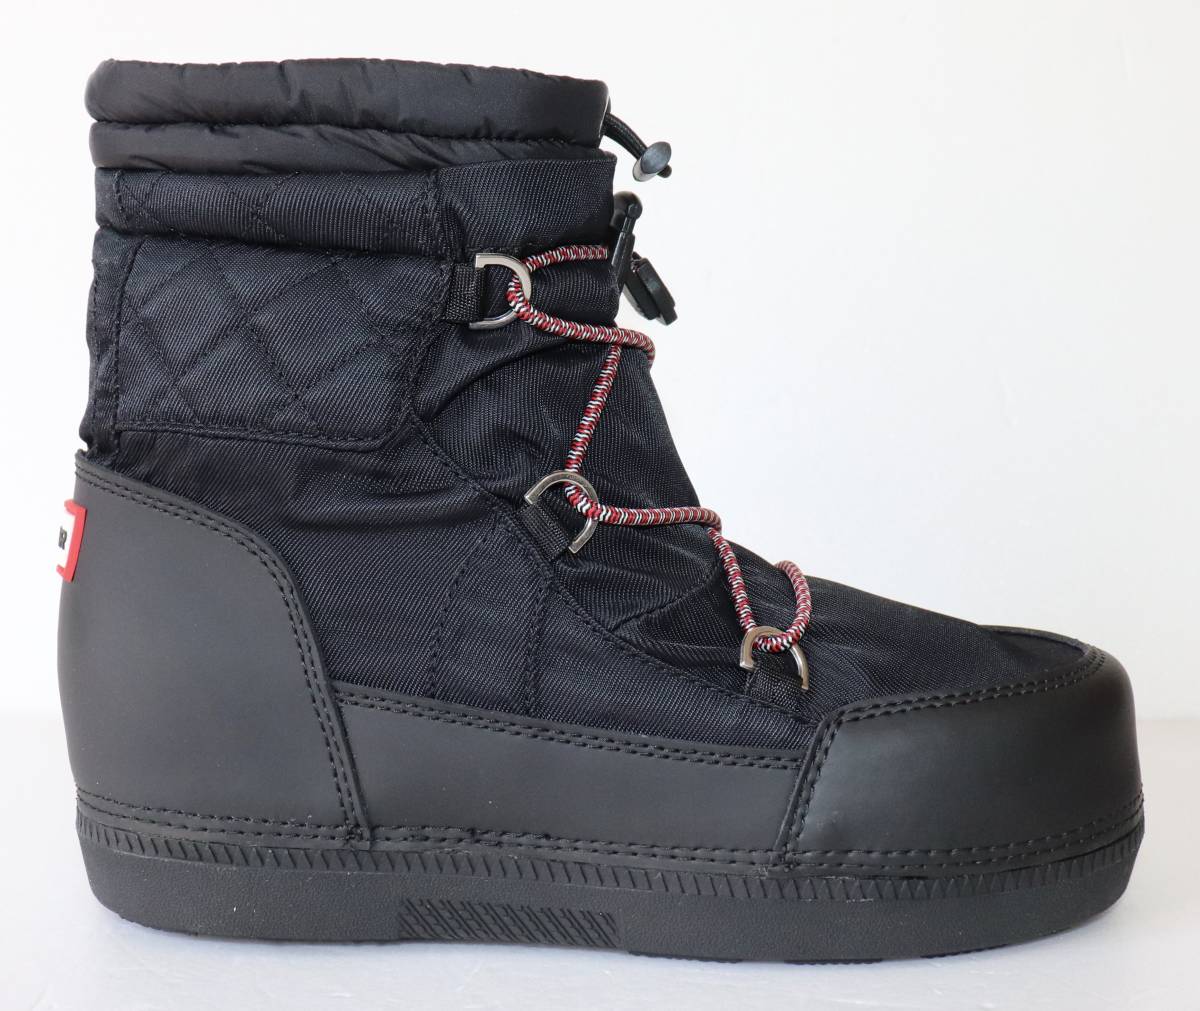  new goods genuine article HUNTER WFS2018WWU ORG SNOW SHORT QUILTED BOOT boots Hunter JP22 US5 UK3 EU36 6016